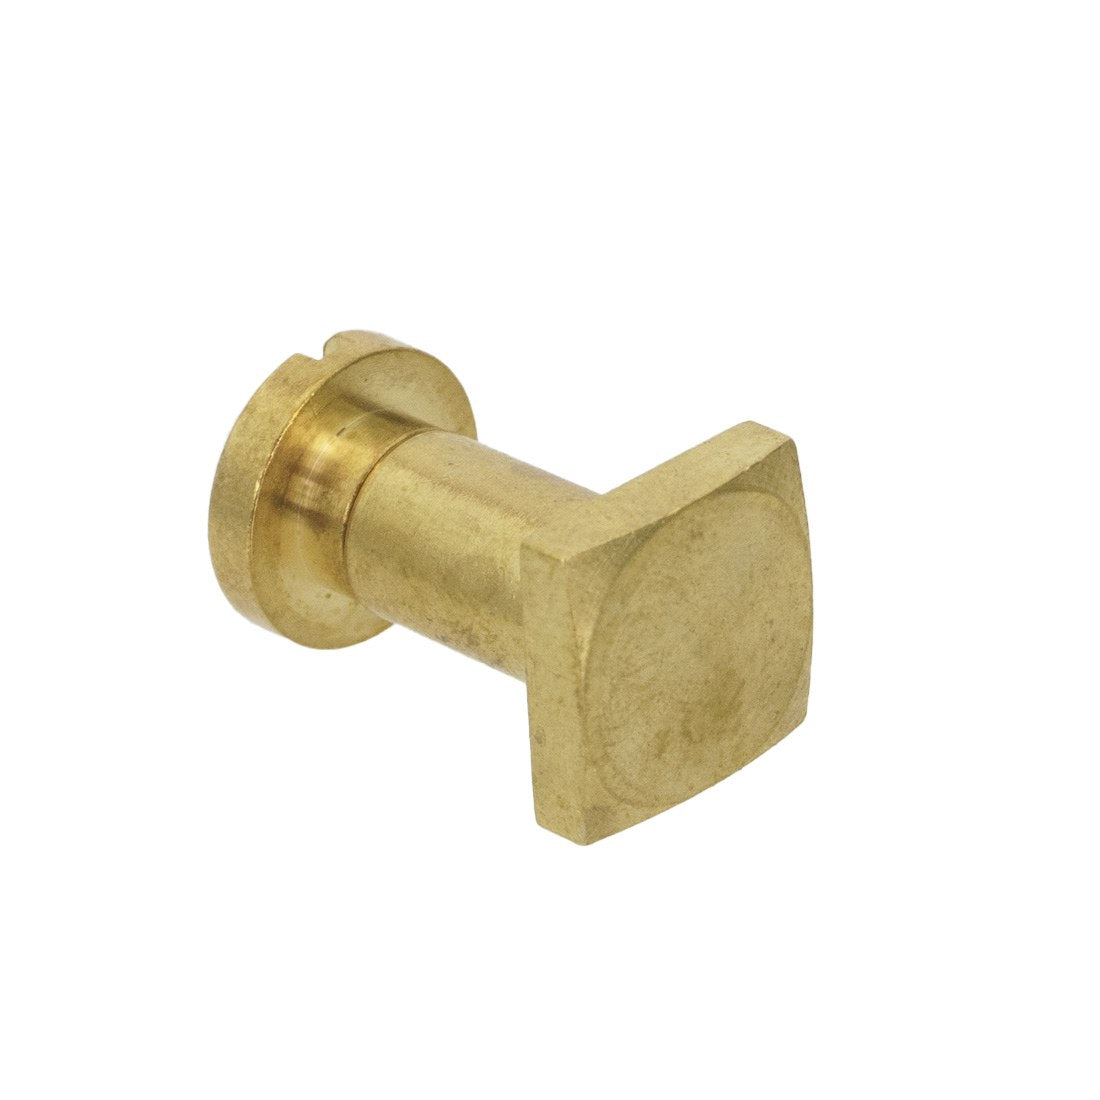 Sörbo Replacement Square Nut and Screw - 1385 Series Angle View